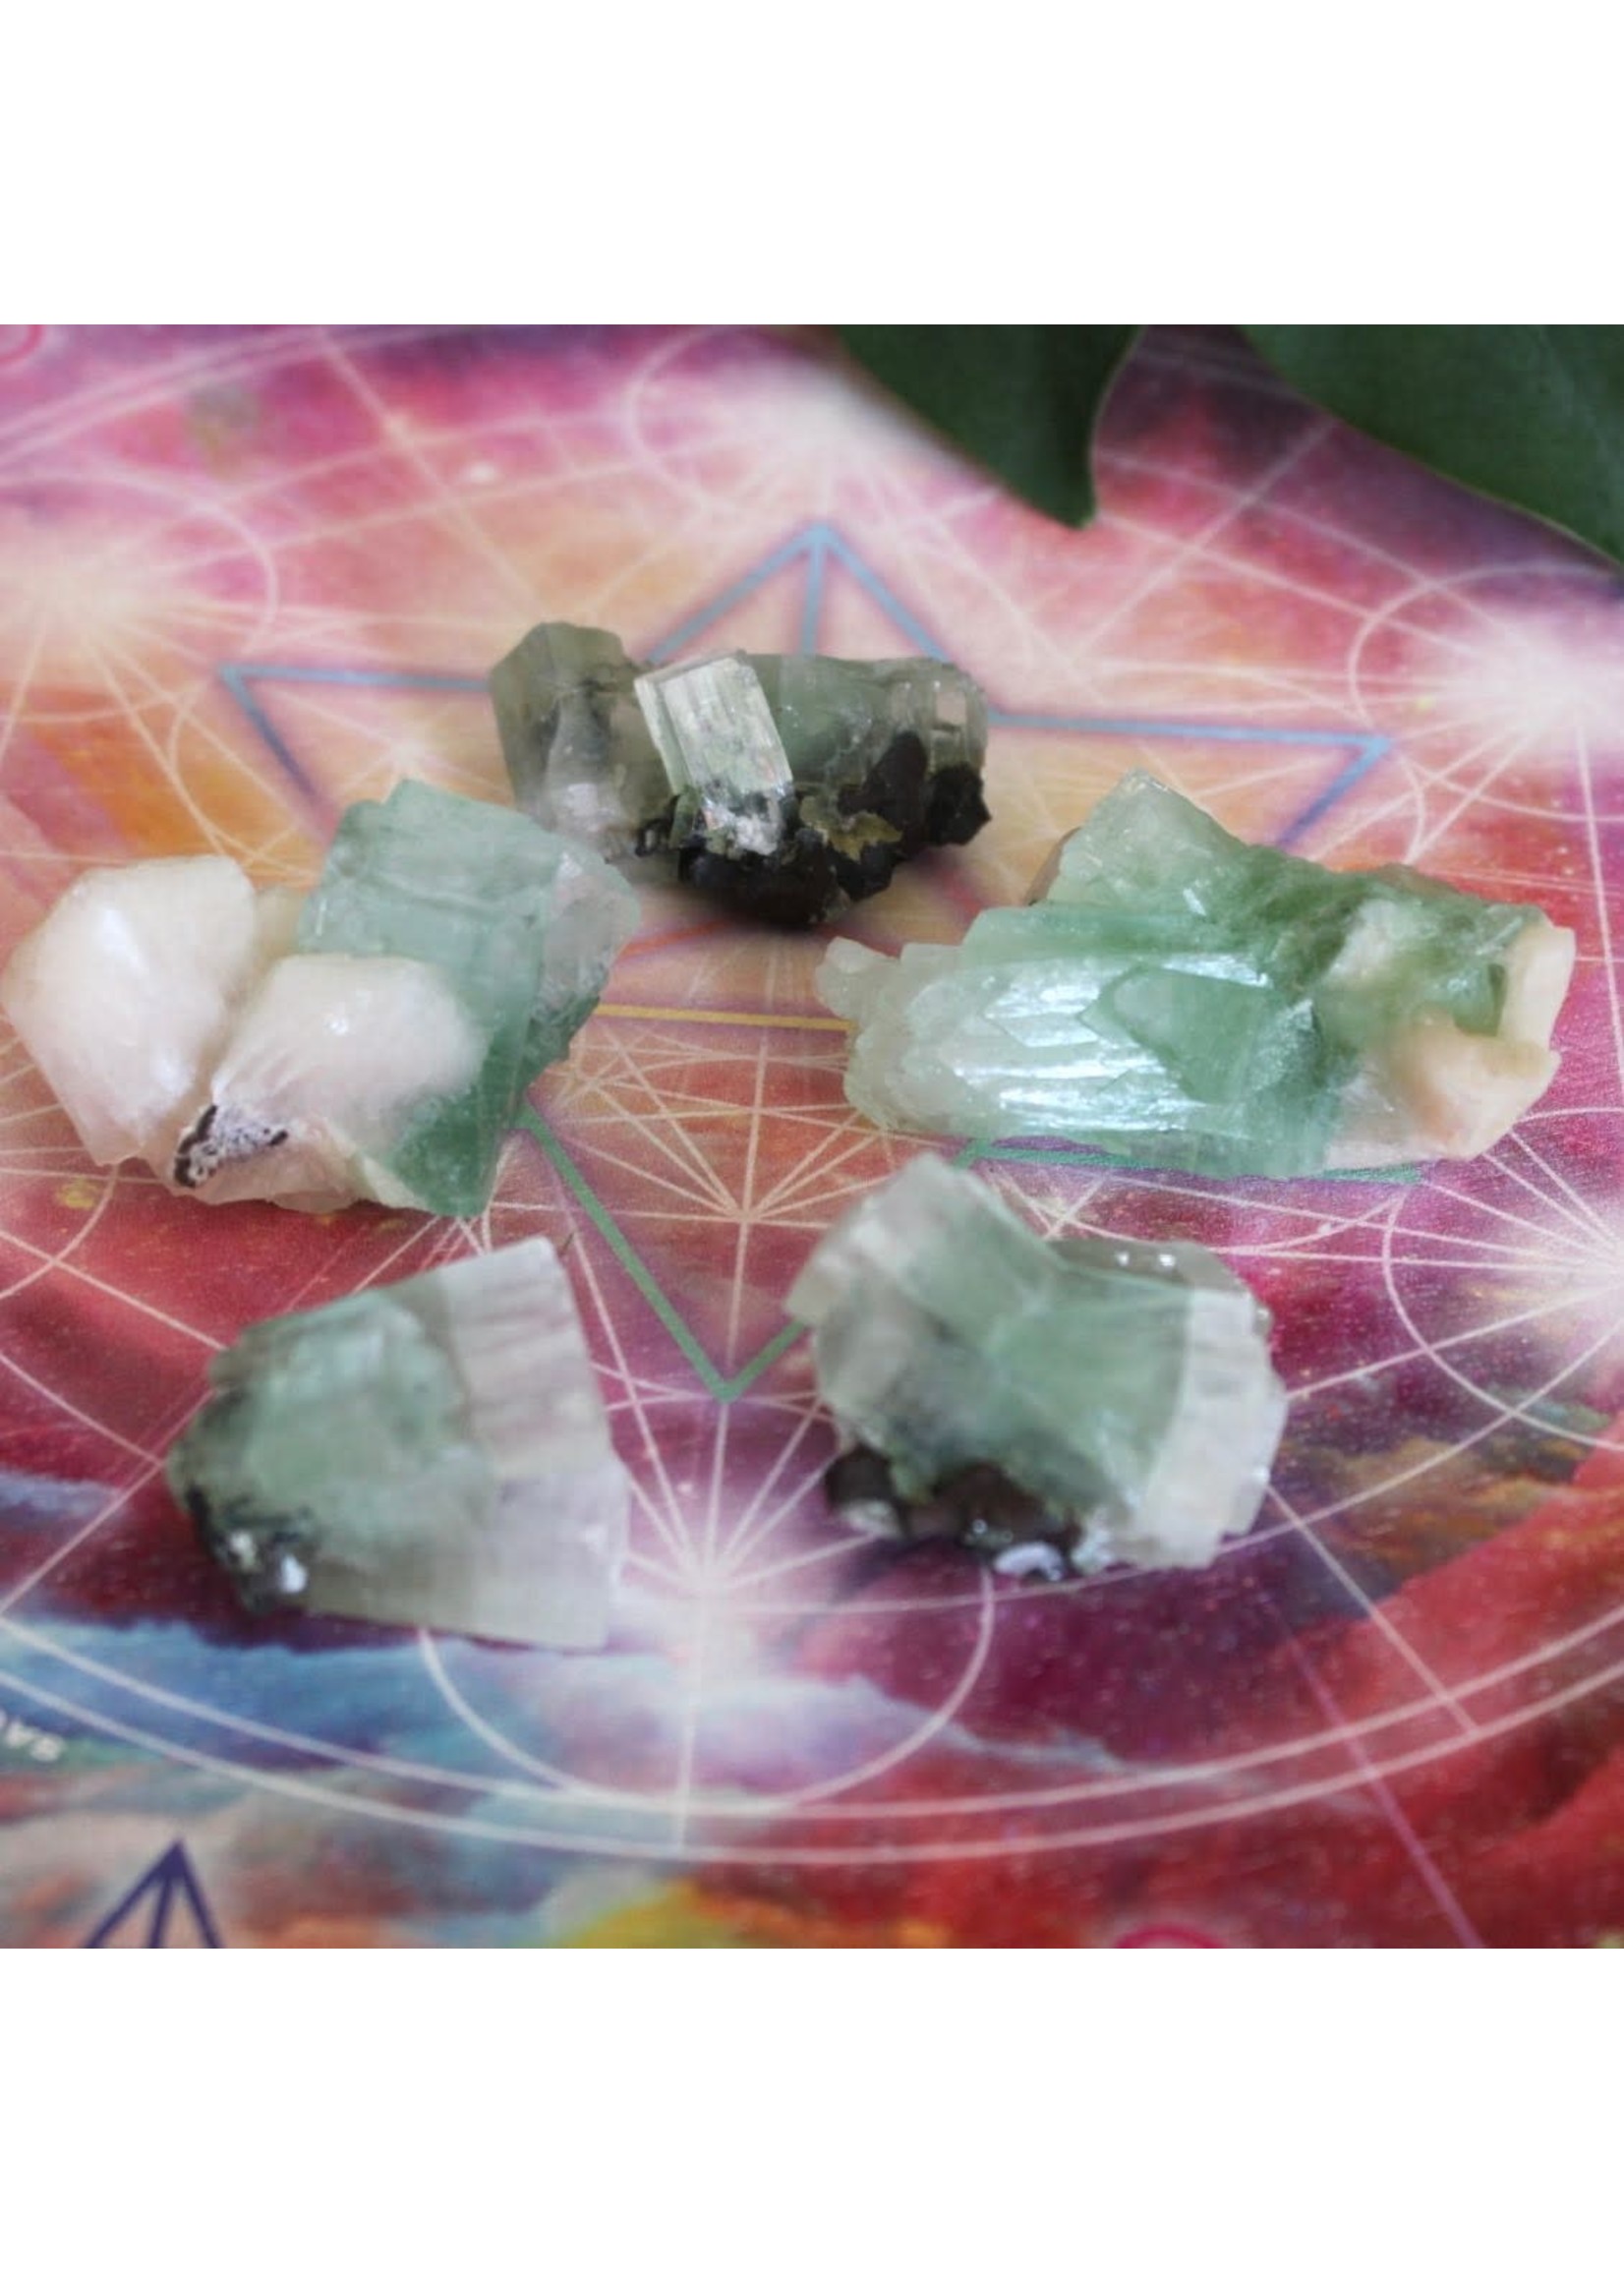 Green Apophyllite with Stilbite Rough charged in the March Full Moon